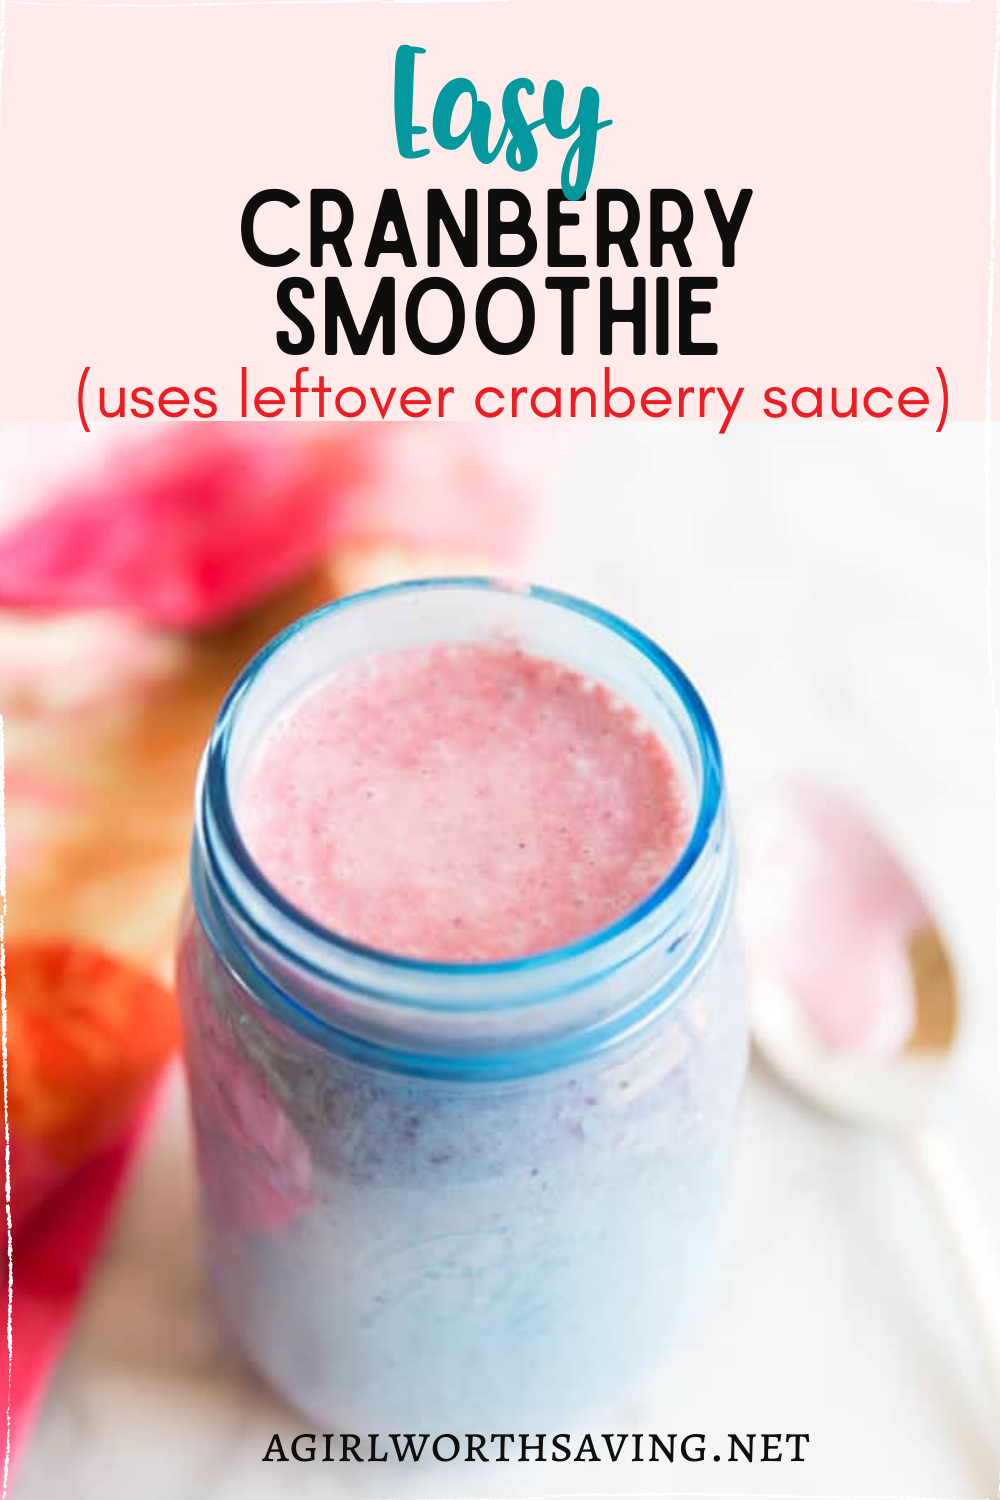 Have a bunch of leftover cranberry sauce? Whip up this super simple, yet tasty cranberry smoothie for a healthy treat.